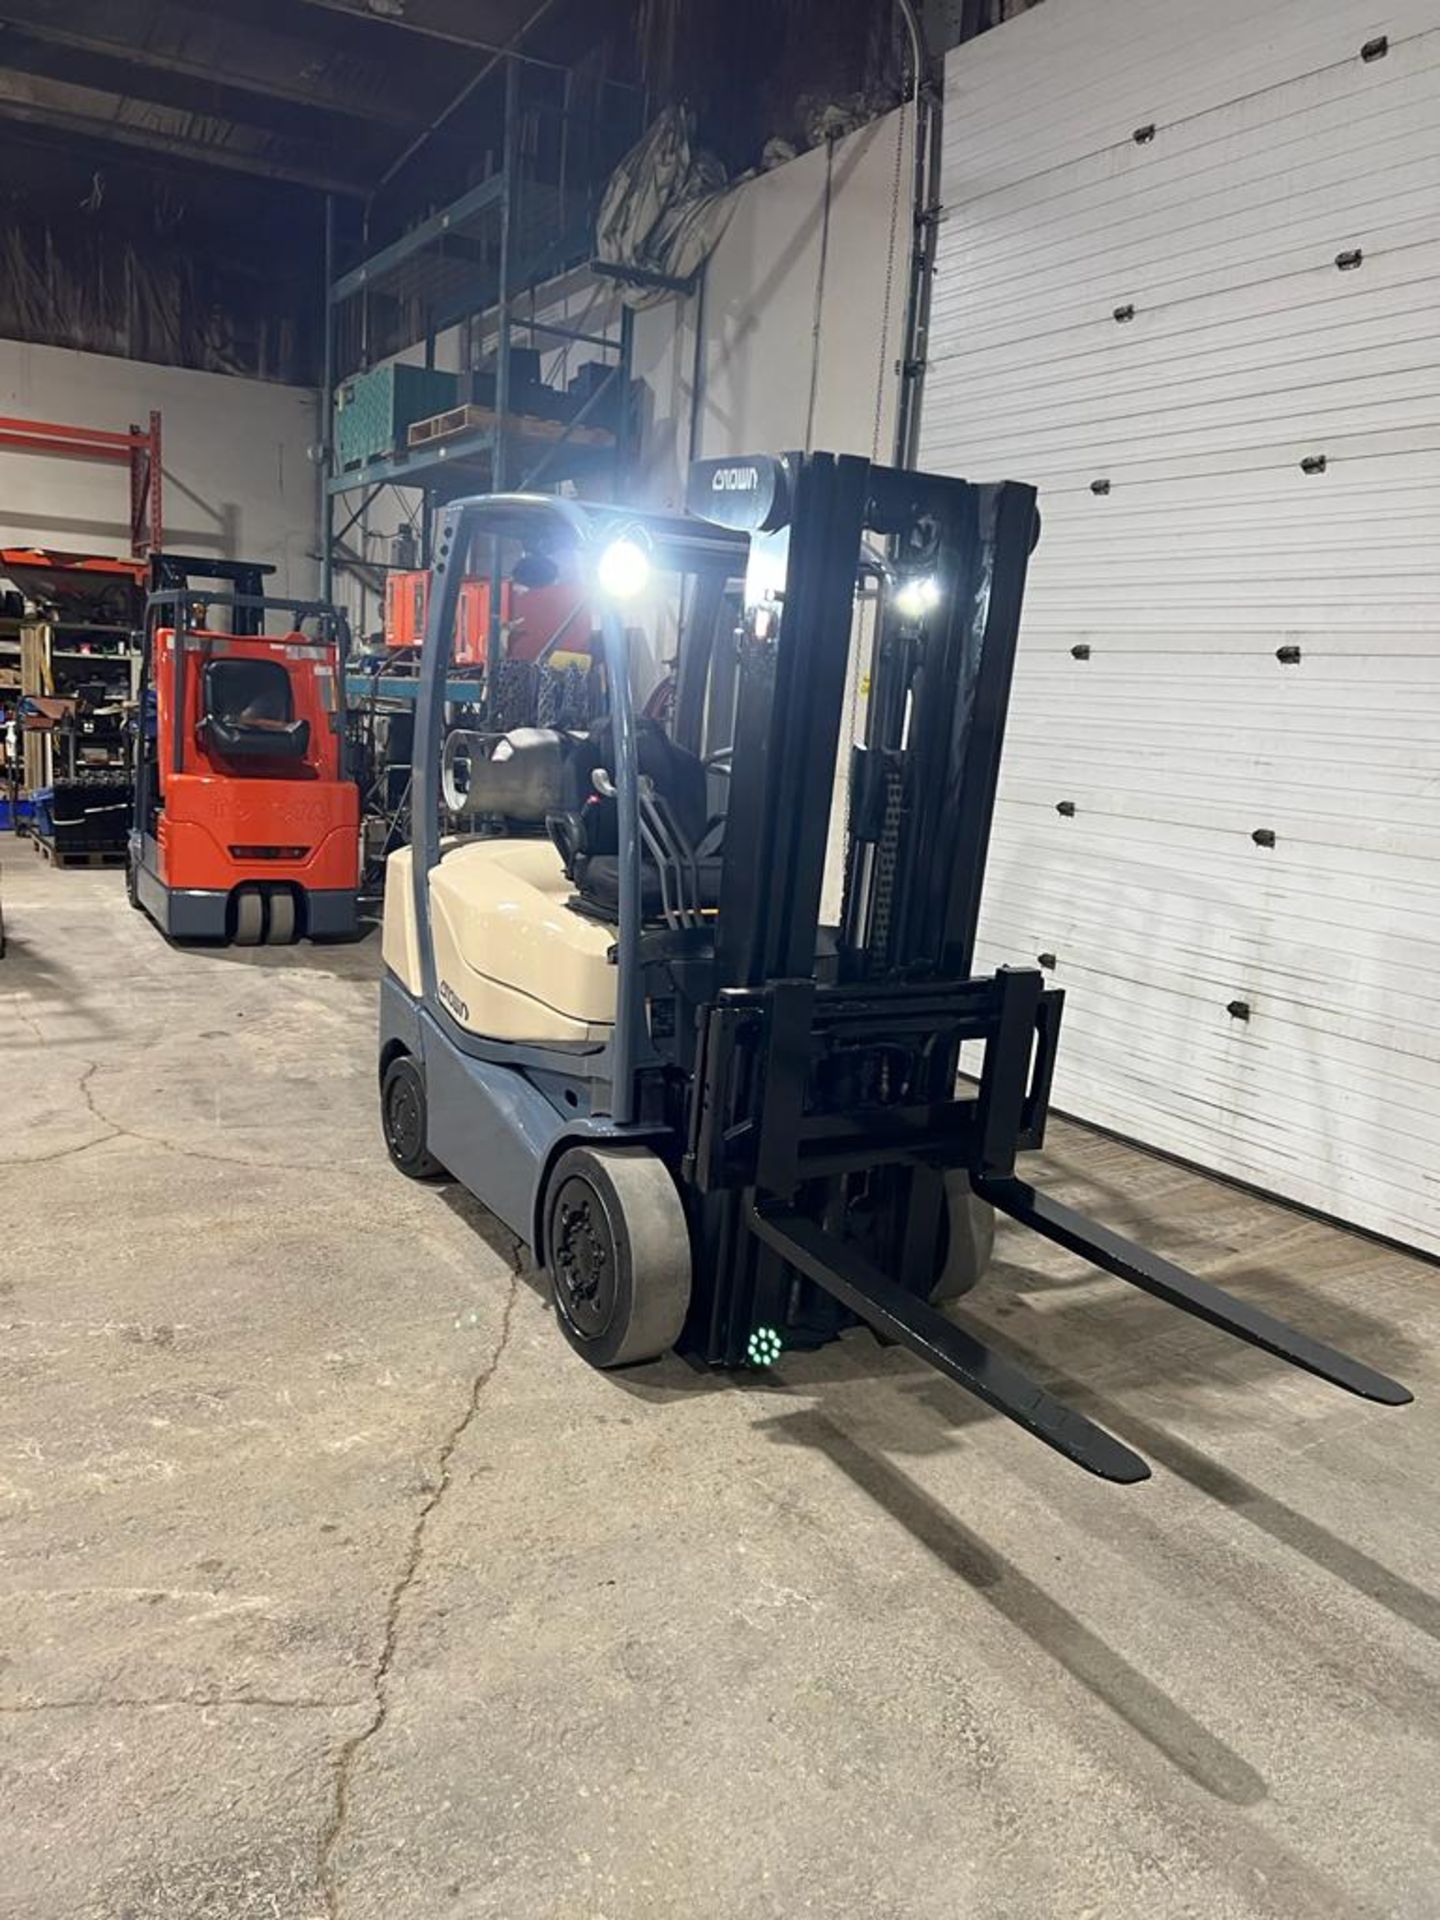 NICE 2016 Crown 5,000lbs Capacity Forklift LPG (propane) with Sideshift & 3-stage Mast (no propane - Image 2 of 4